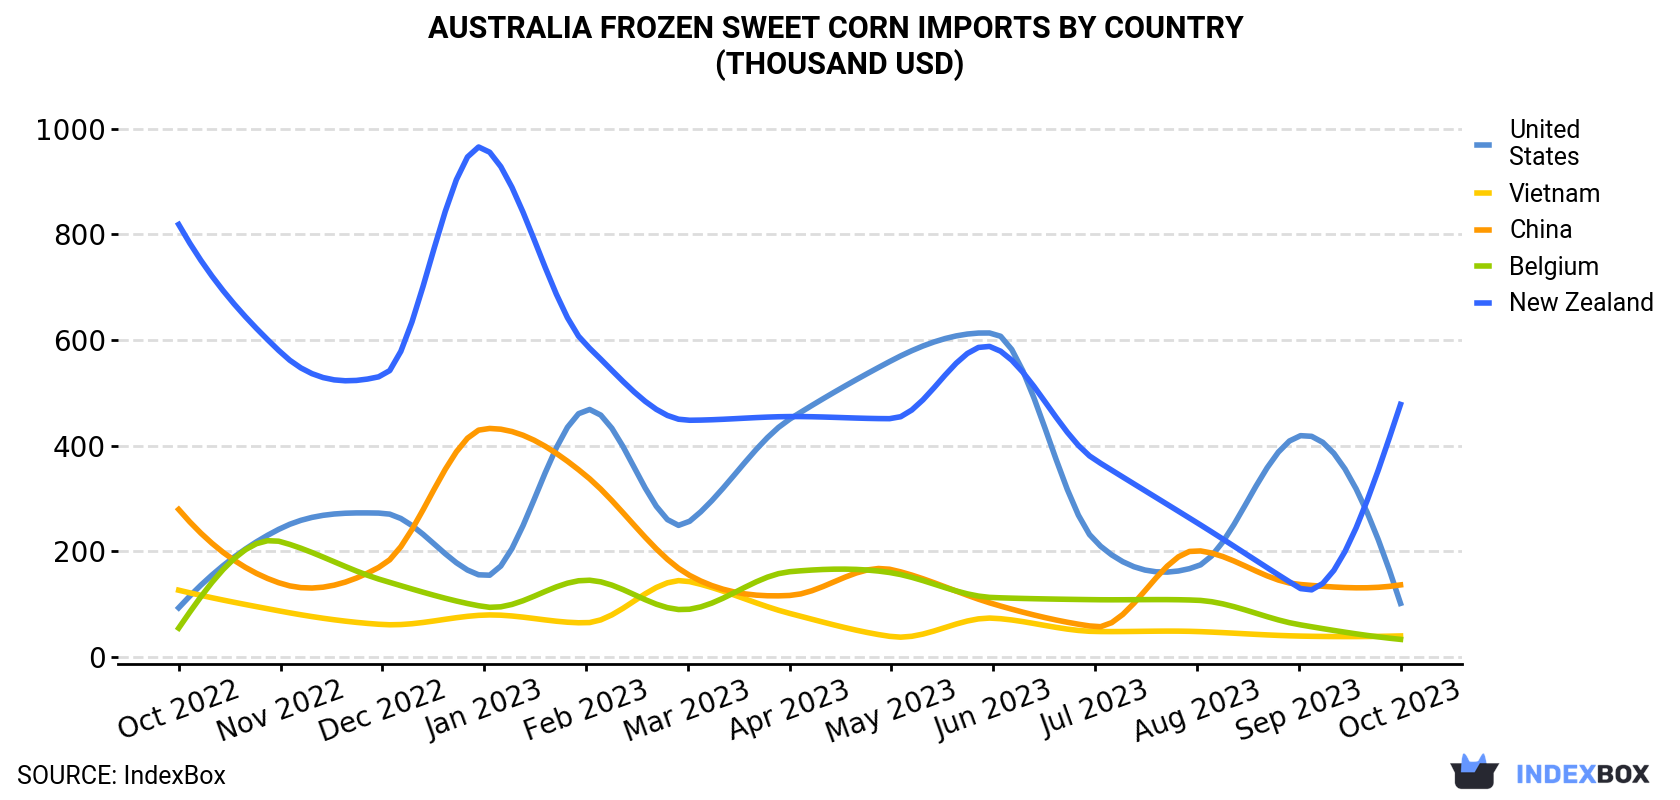 Australia Frozen Sweet Corn Imports By Country (Thousand USD)